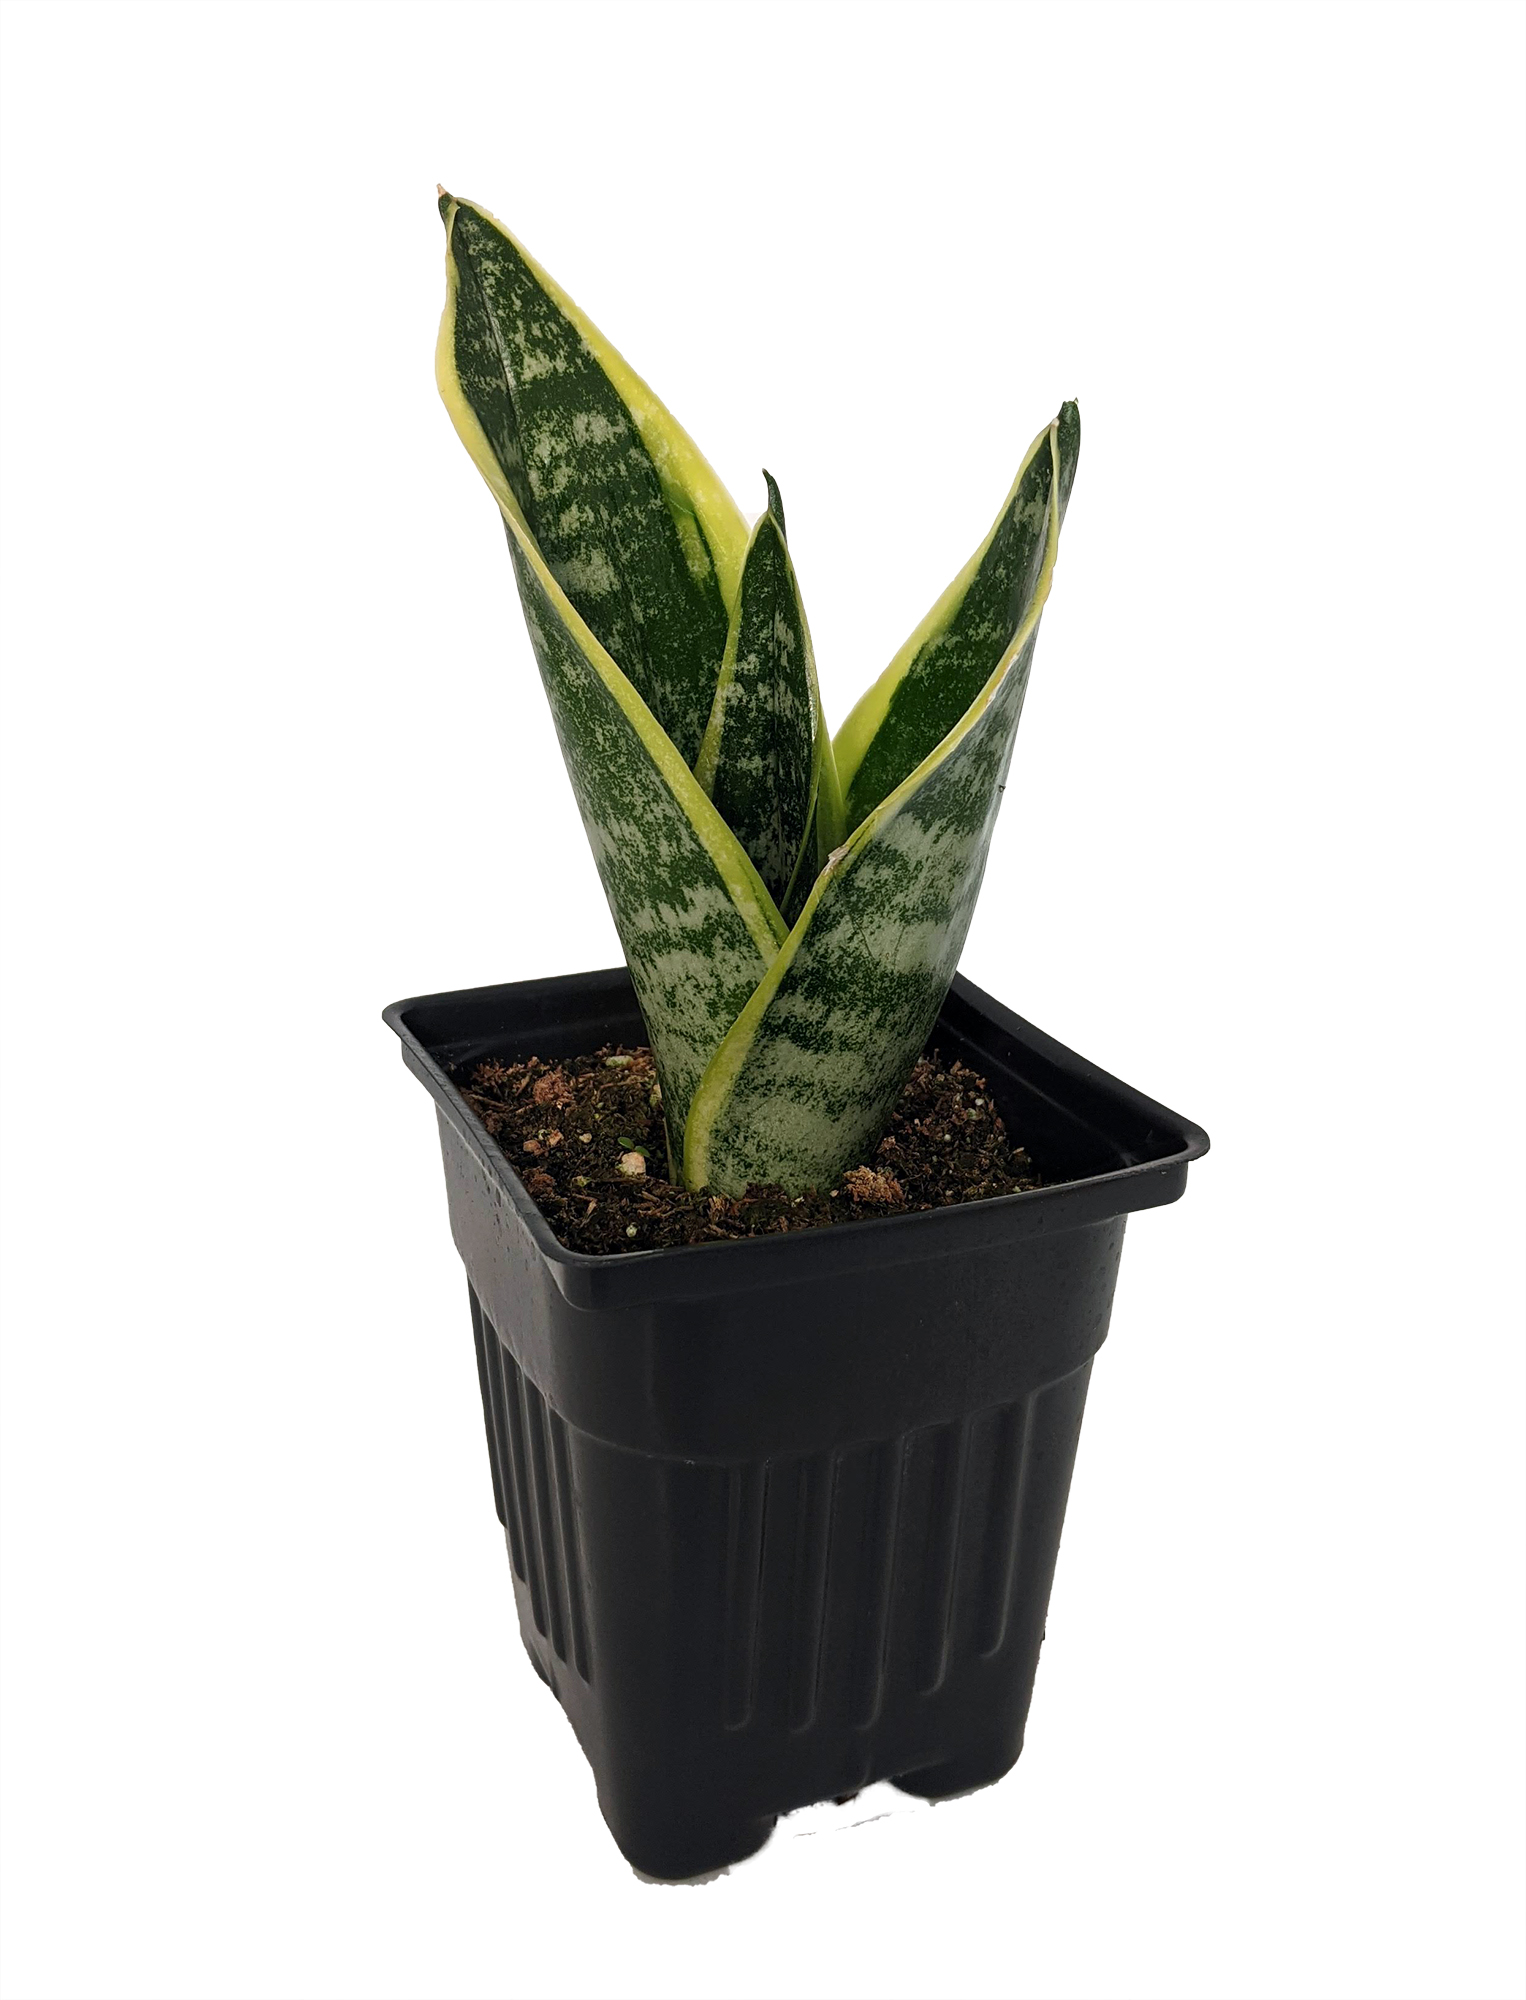 Superba Snake Plant - Sanseveria - Almost Impossible to kill - 4" Pot - image 2 of 4